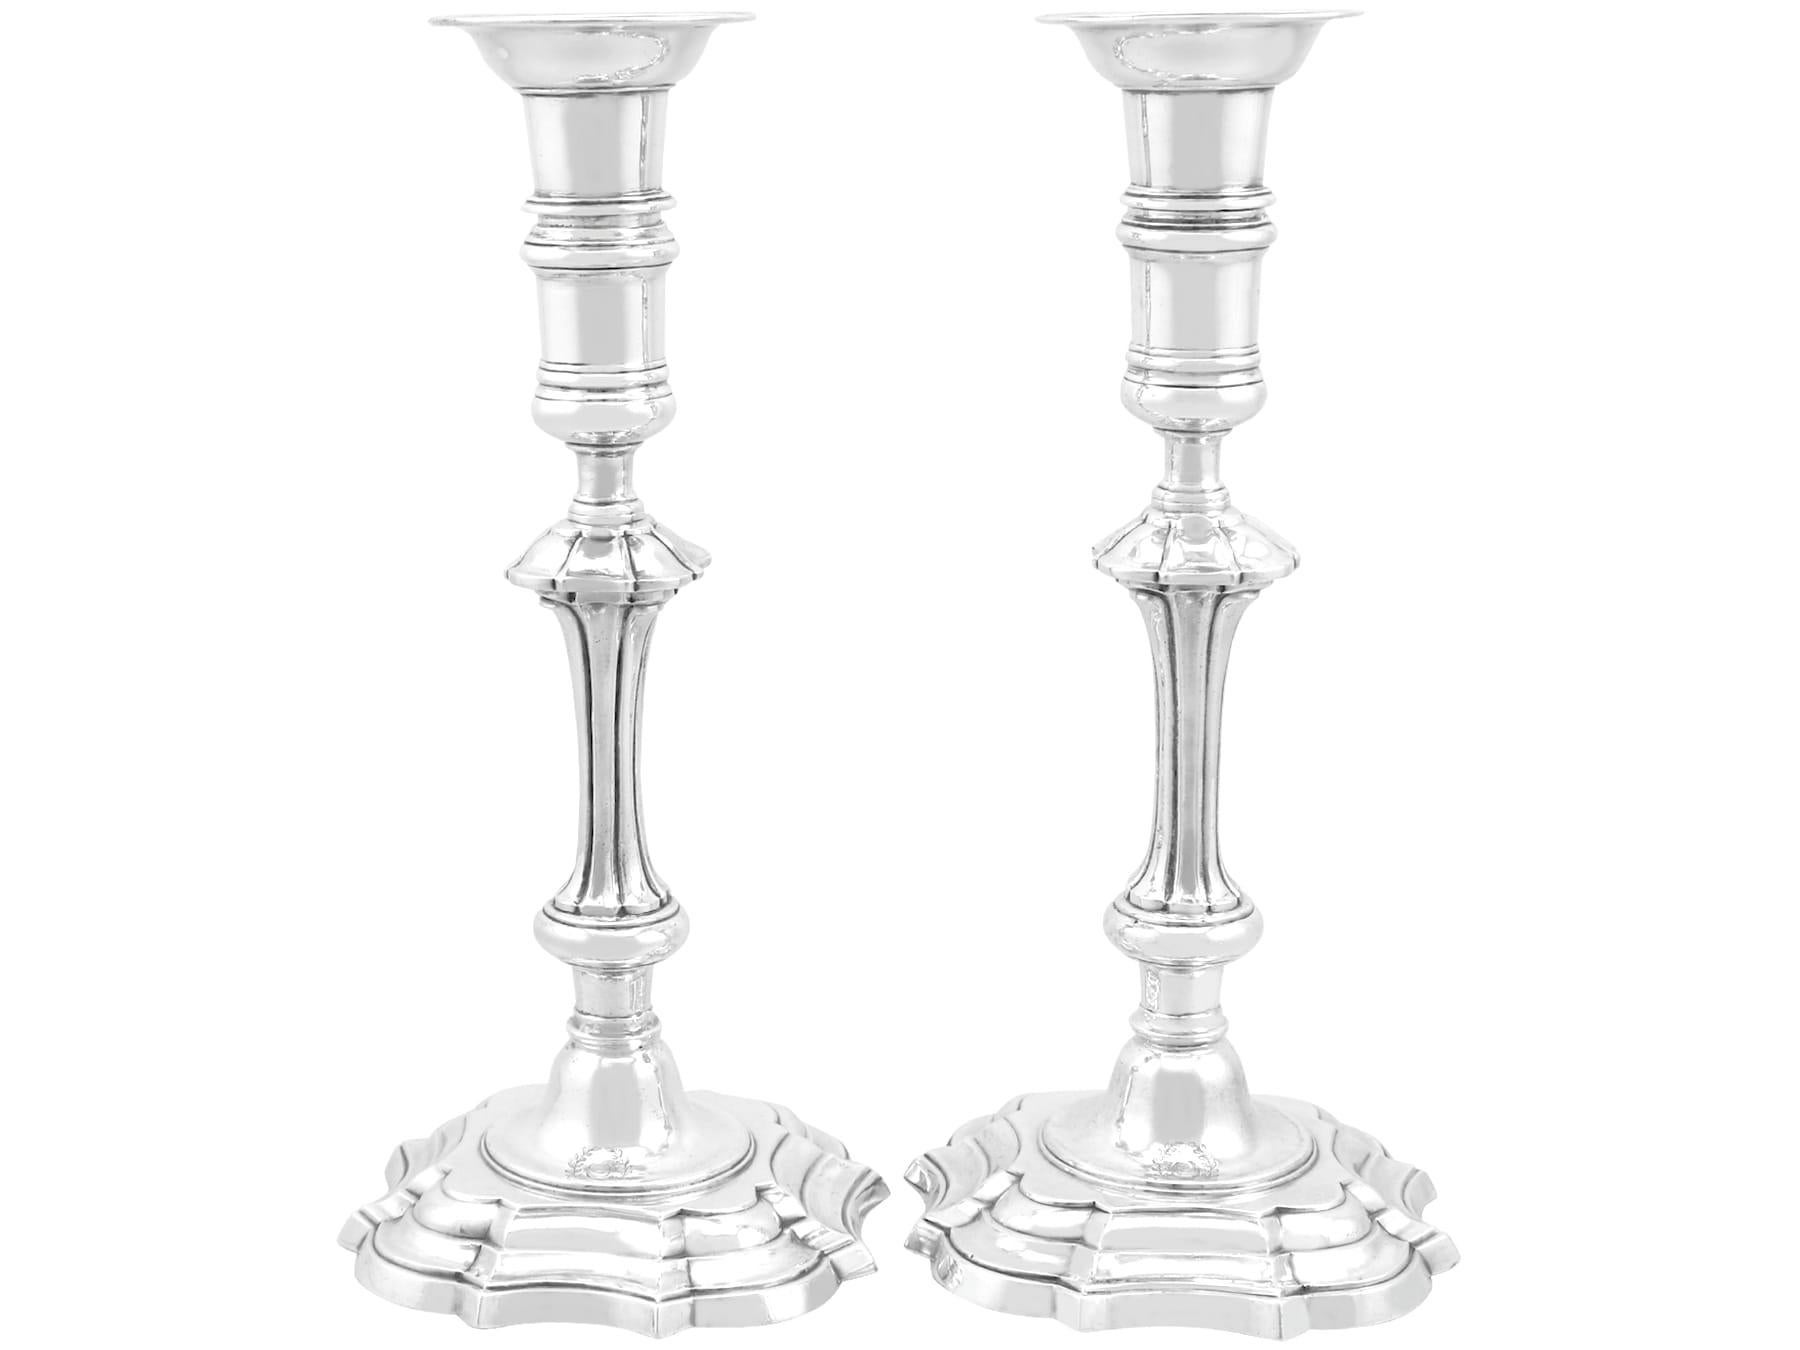 An exceptional, fine and impressive pair of antique Irish cast sterling silver candlesticks; an addition to our antique silverware collection

These exceptional antique cast Irish sterling silver candlesticks have a simplified classic 18th century